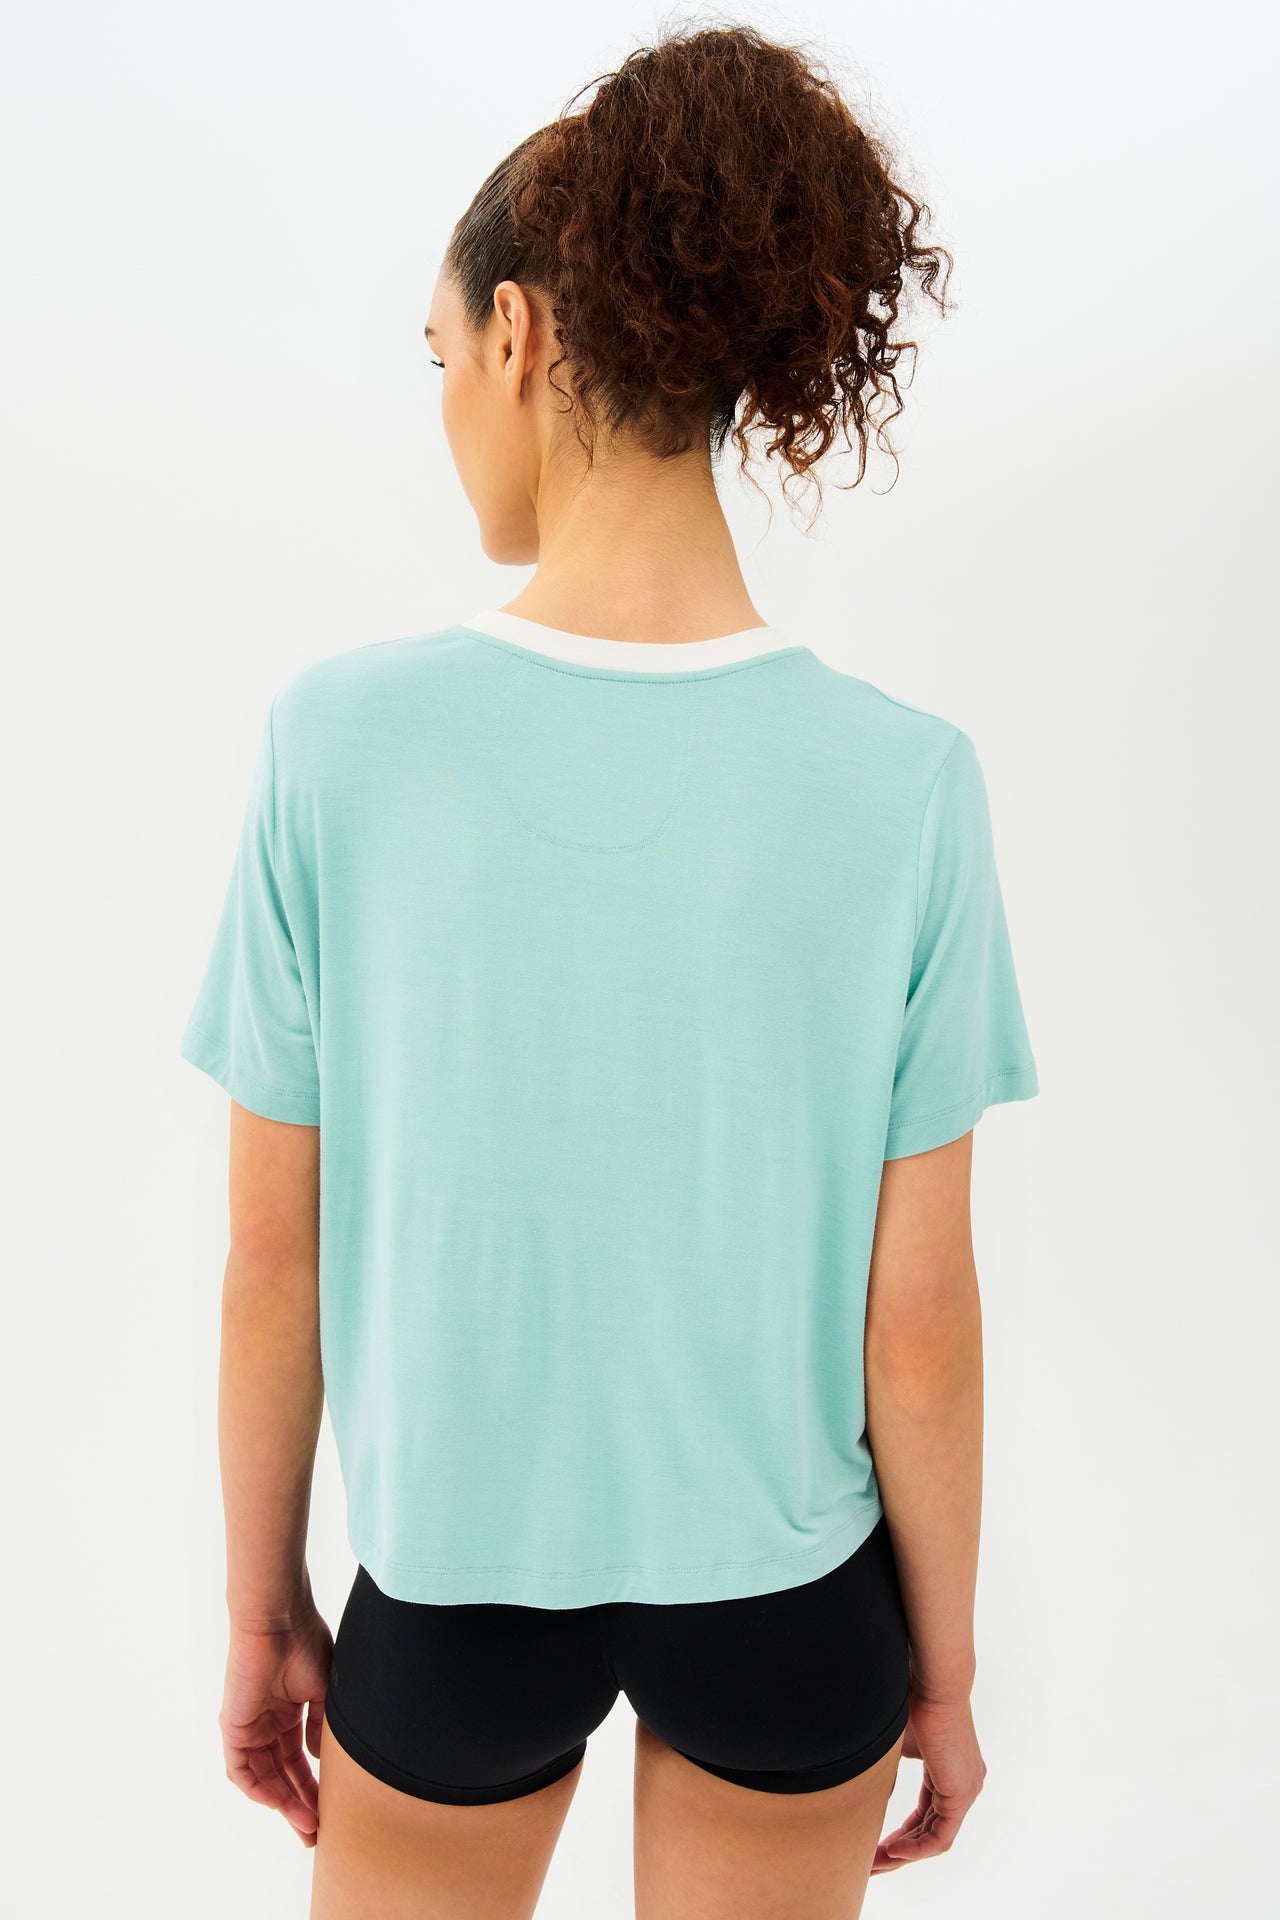 Back view of girl wearing light blue cropped short sleeve t-shirt with thin white neck hem and black bike shorts 